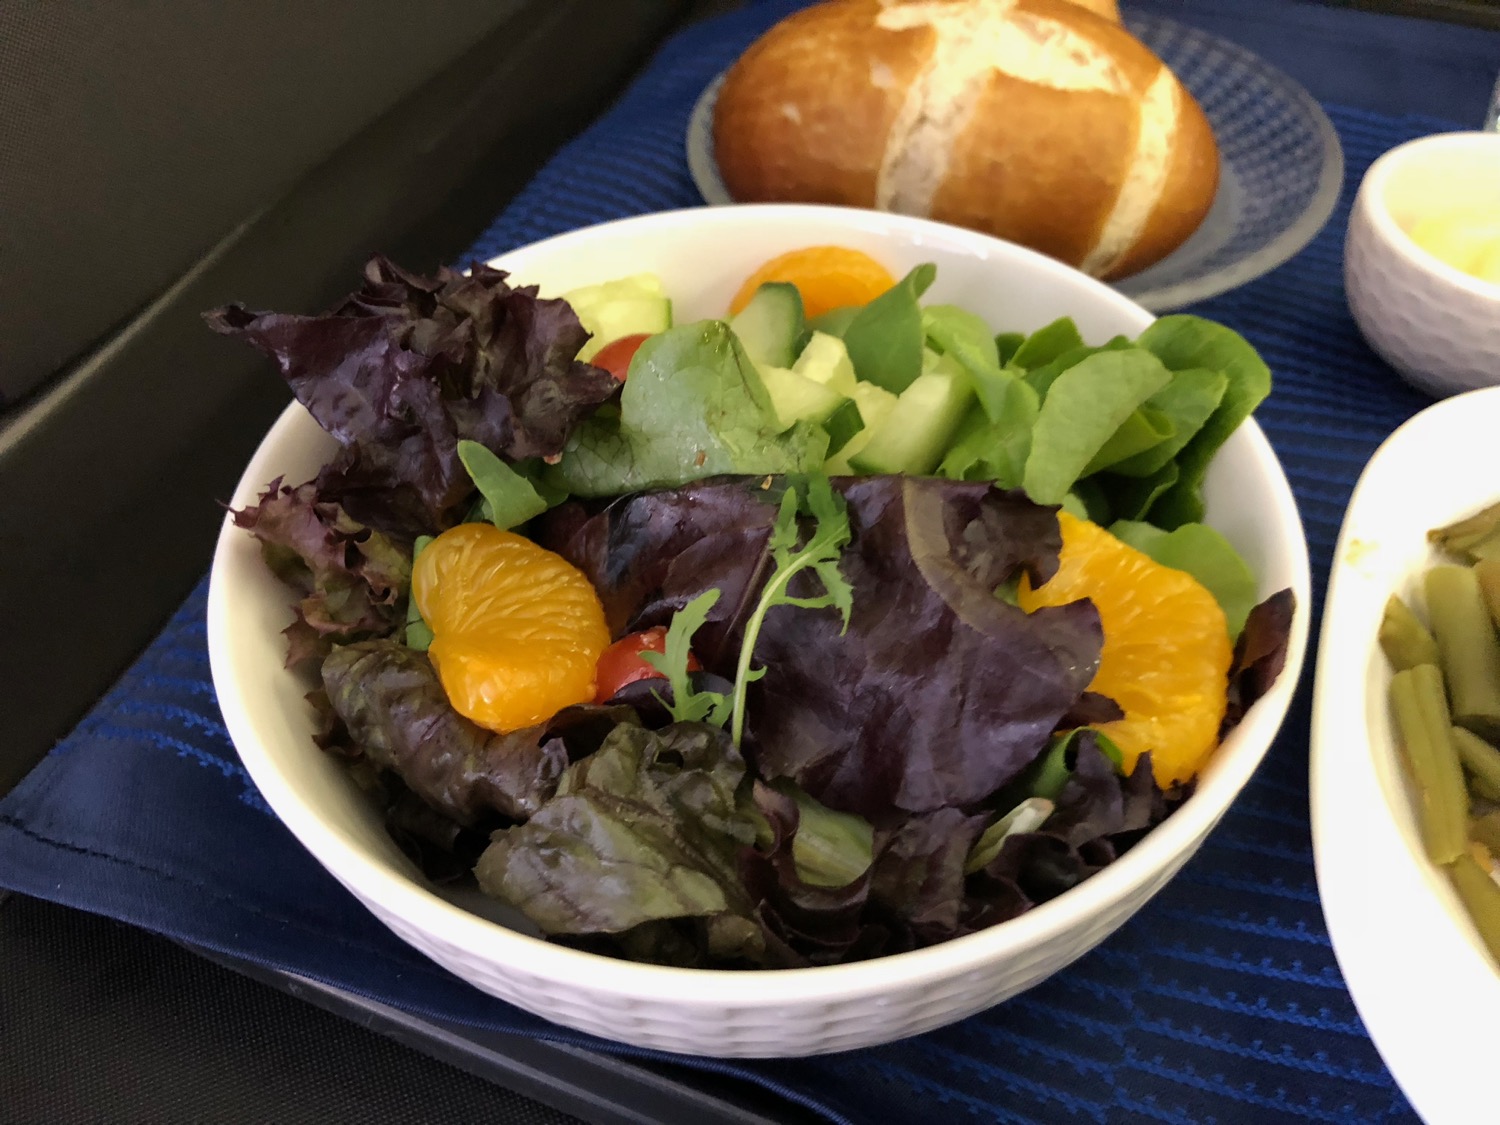 a bowl of salad with oranges and lettuce